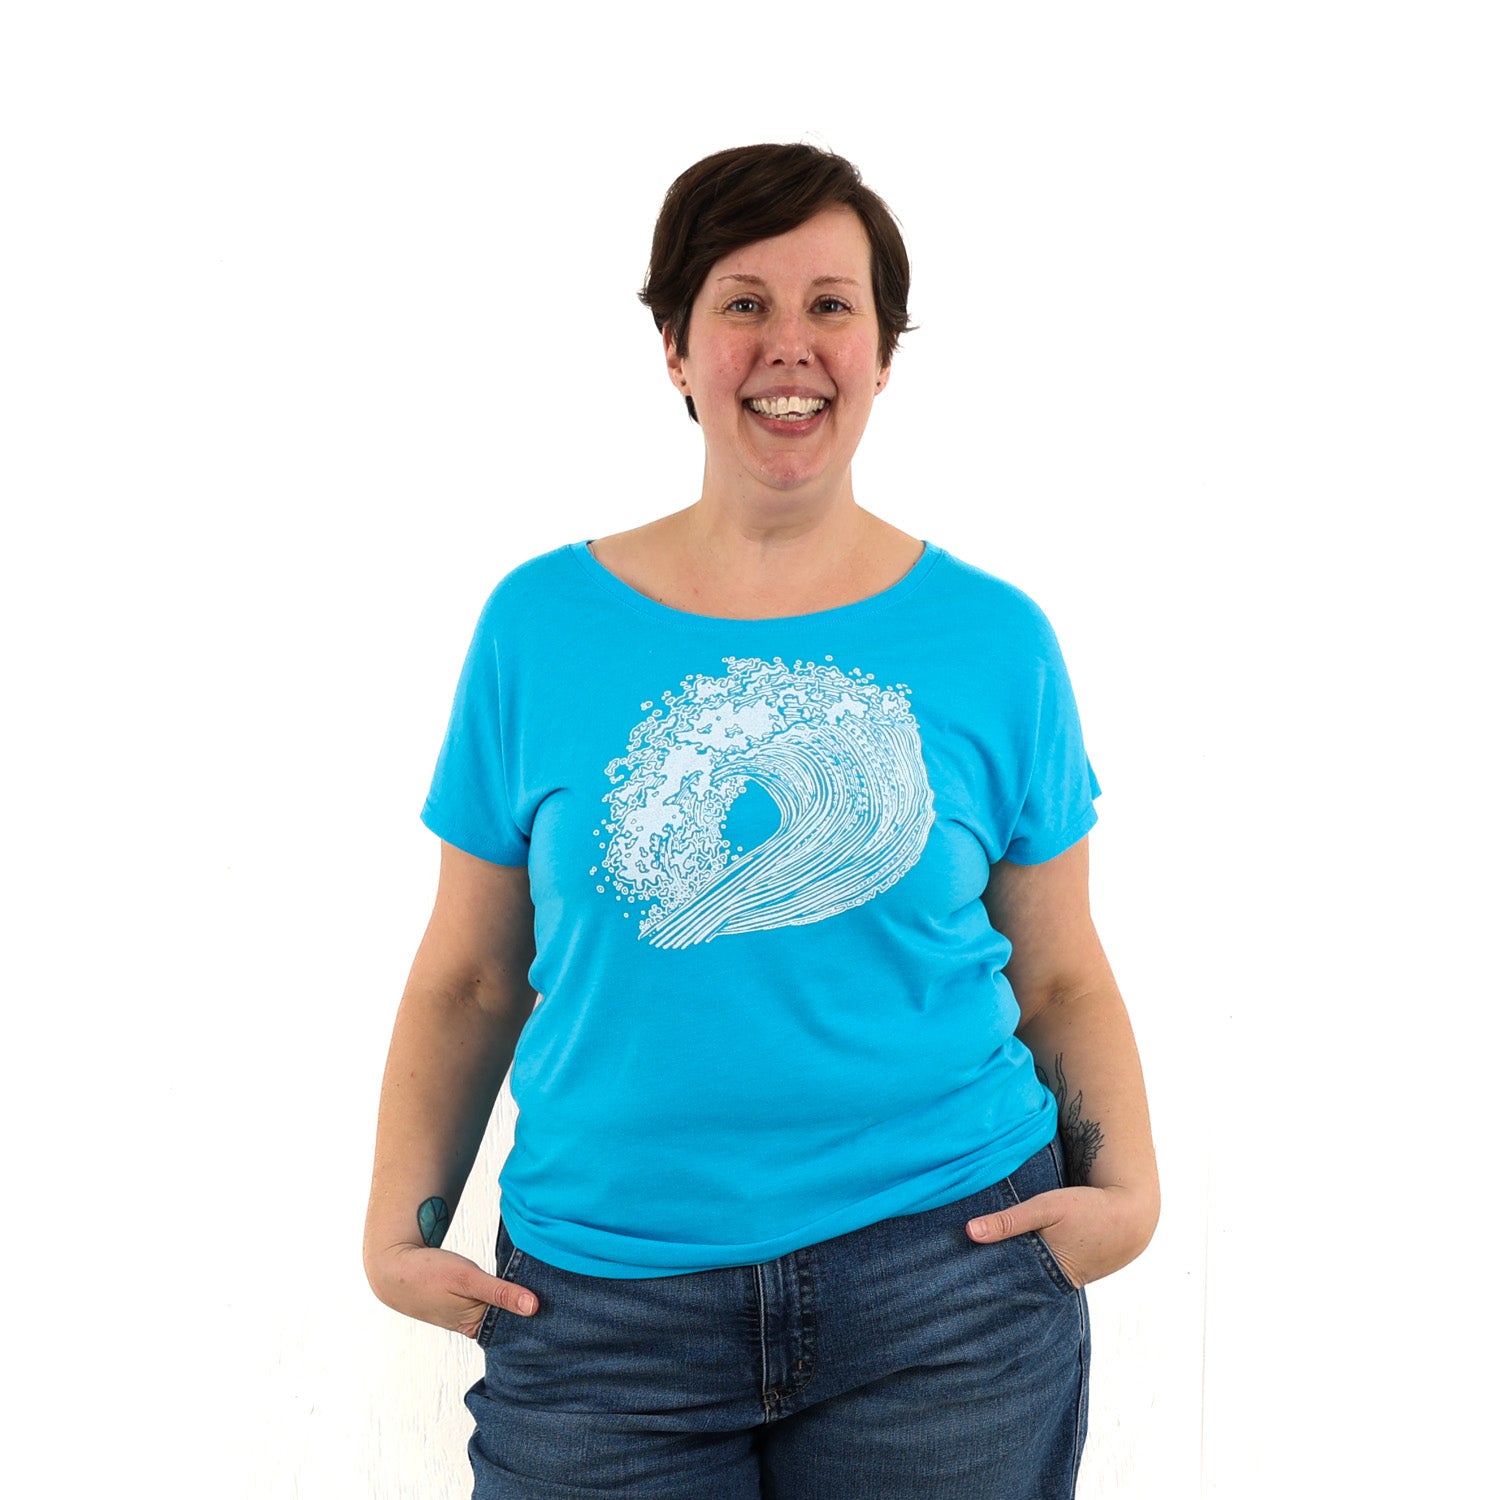 Woman wearing bright blue t shirt with a big wave printed on it in white ink